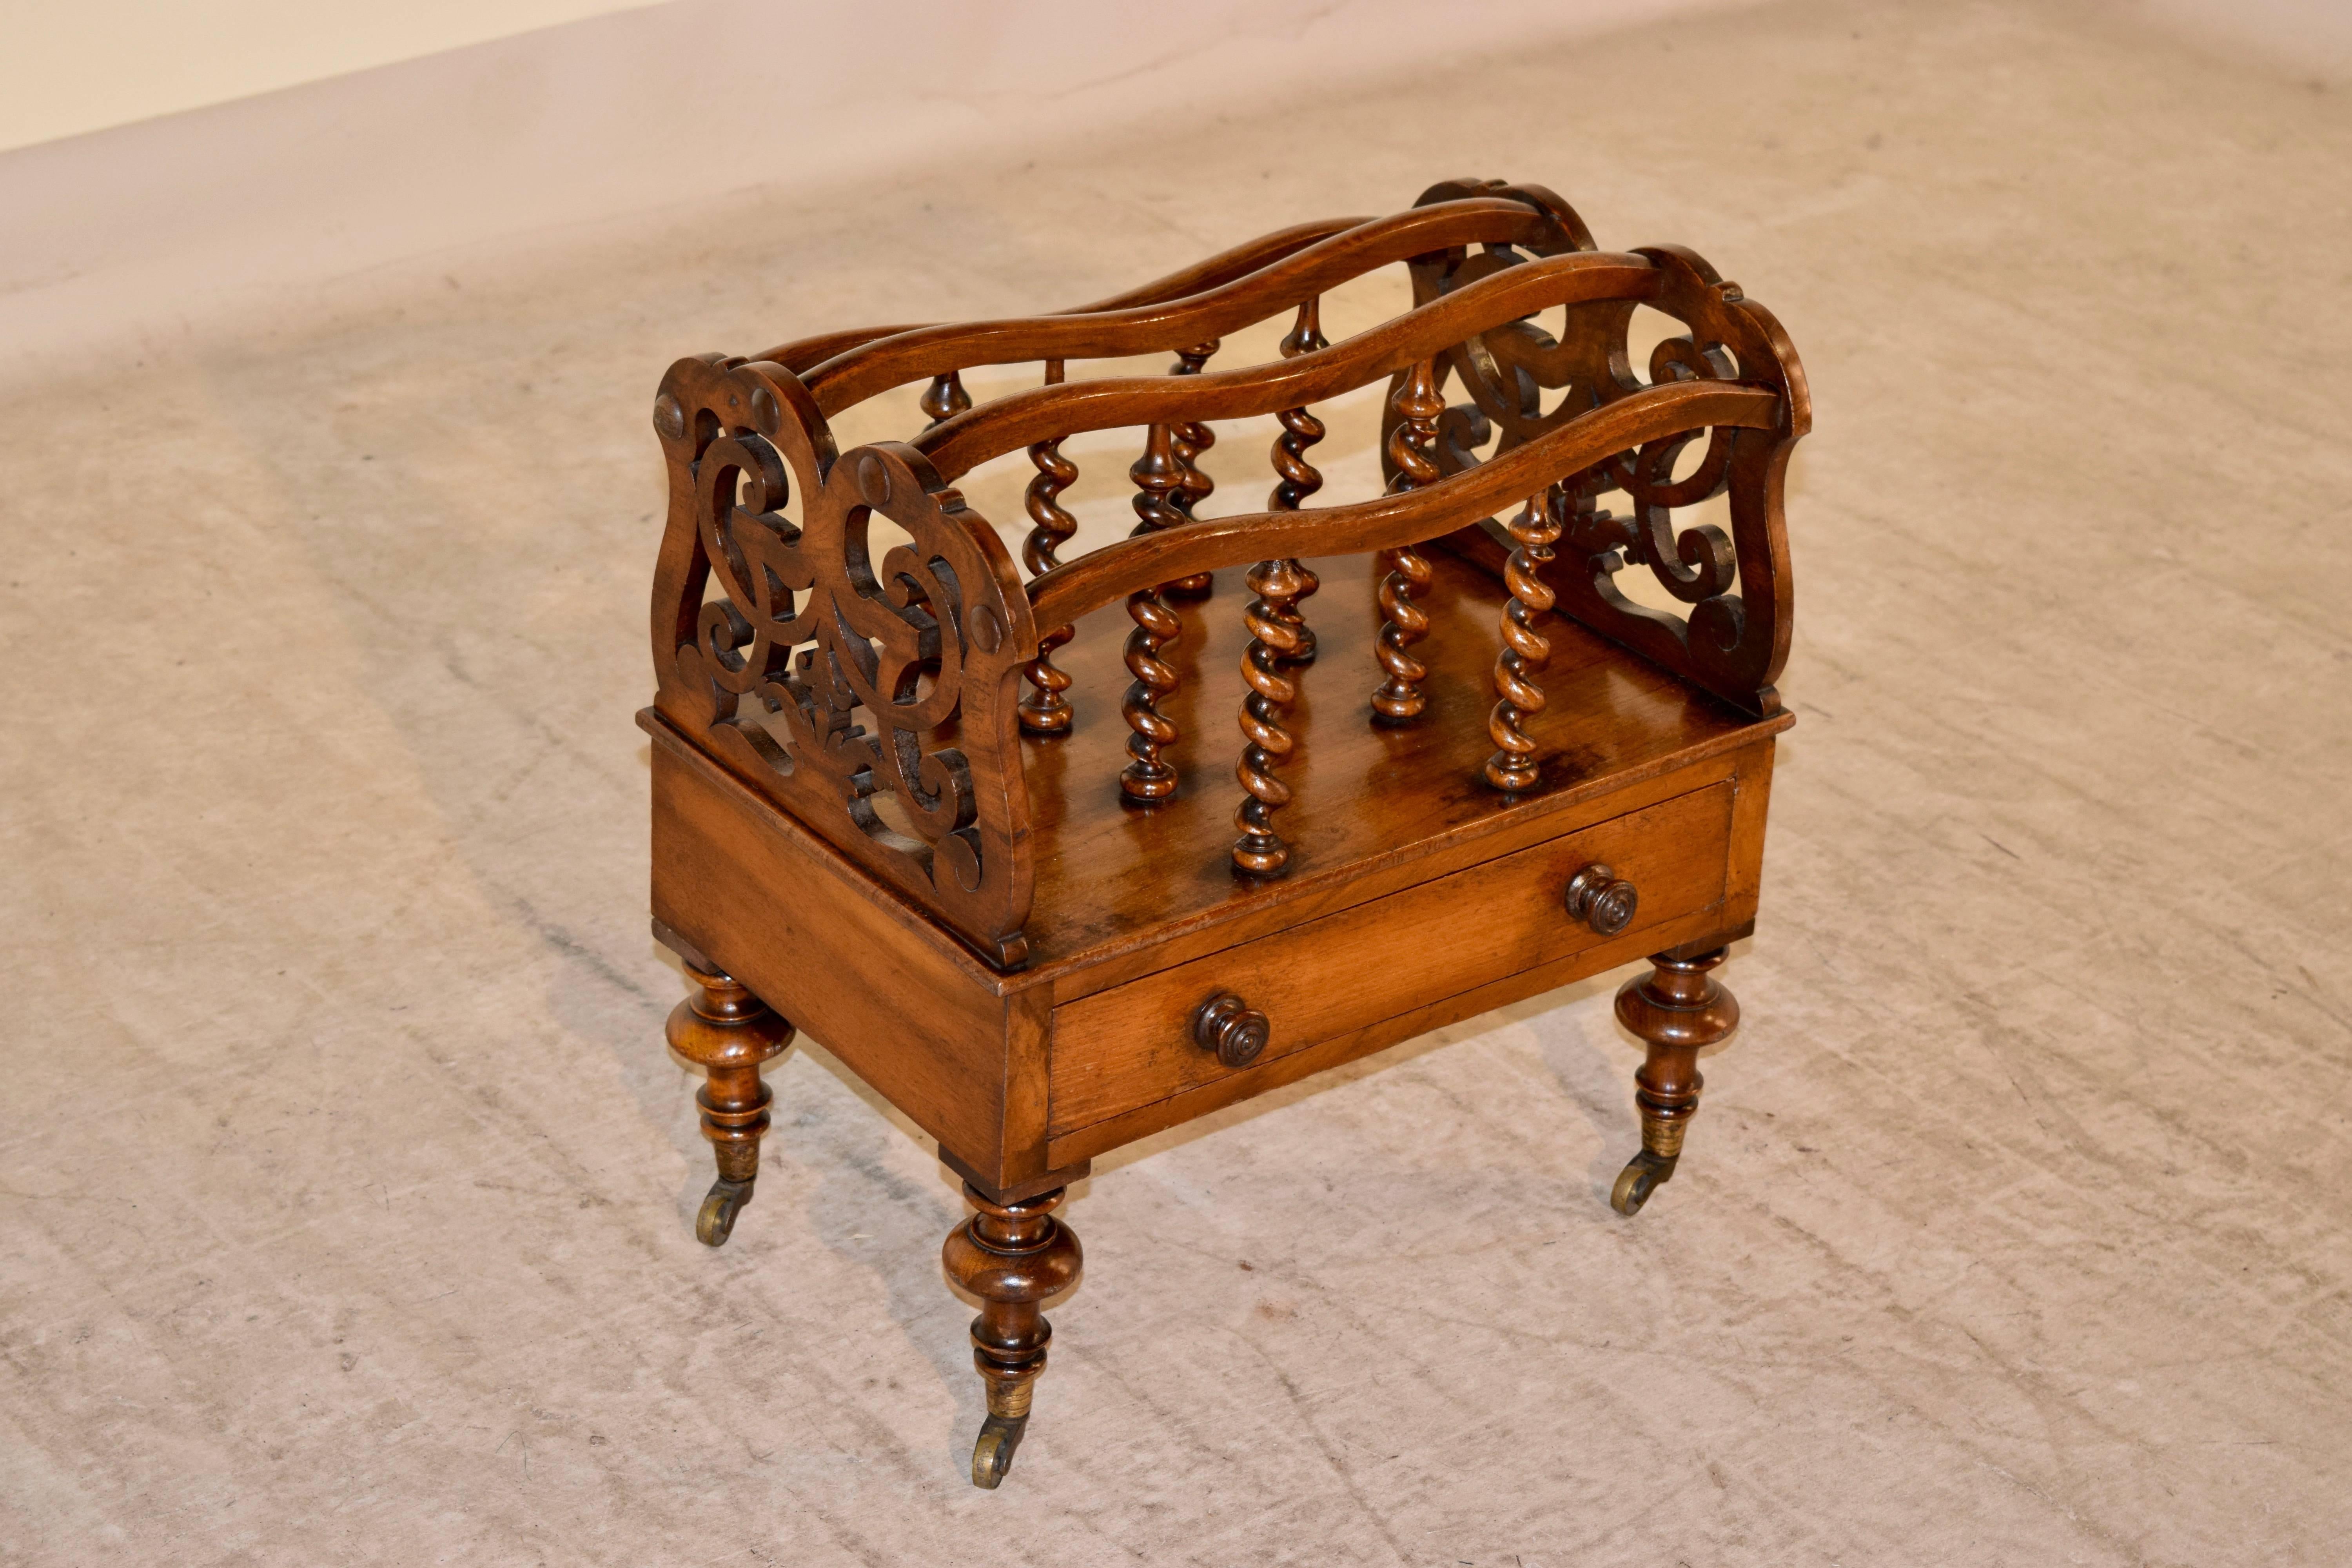 19th century mahogany canterbury from England. The sides are pierced and are joined by serpentine shaped rails, which are connected to the base by hand turned barley twist spindles. The base has a single drawer and the piece is raised on hand turned